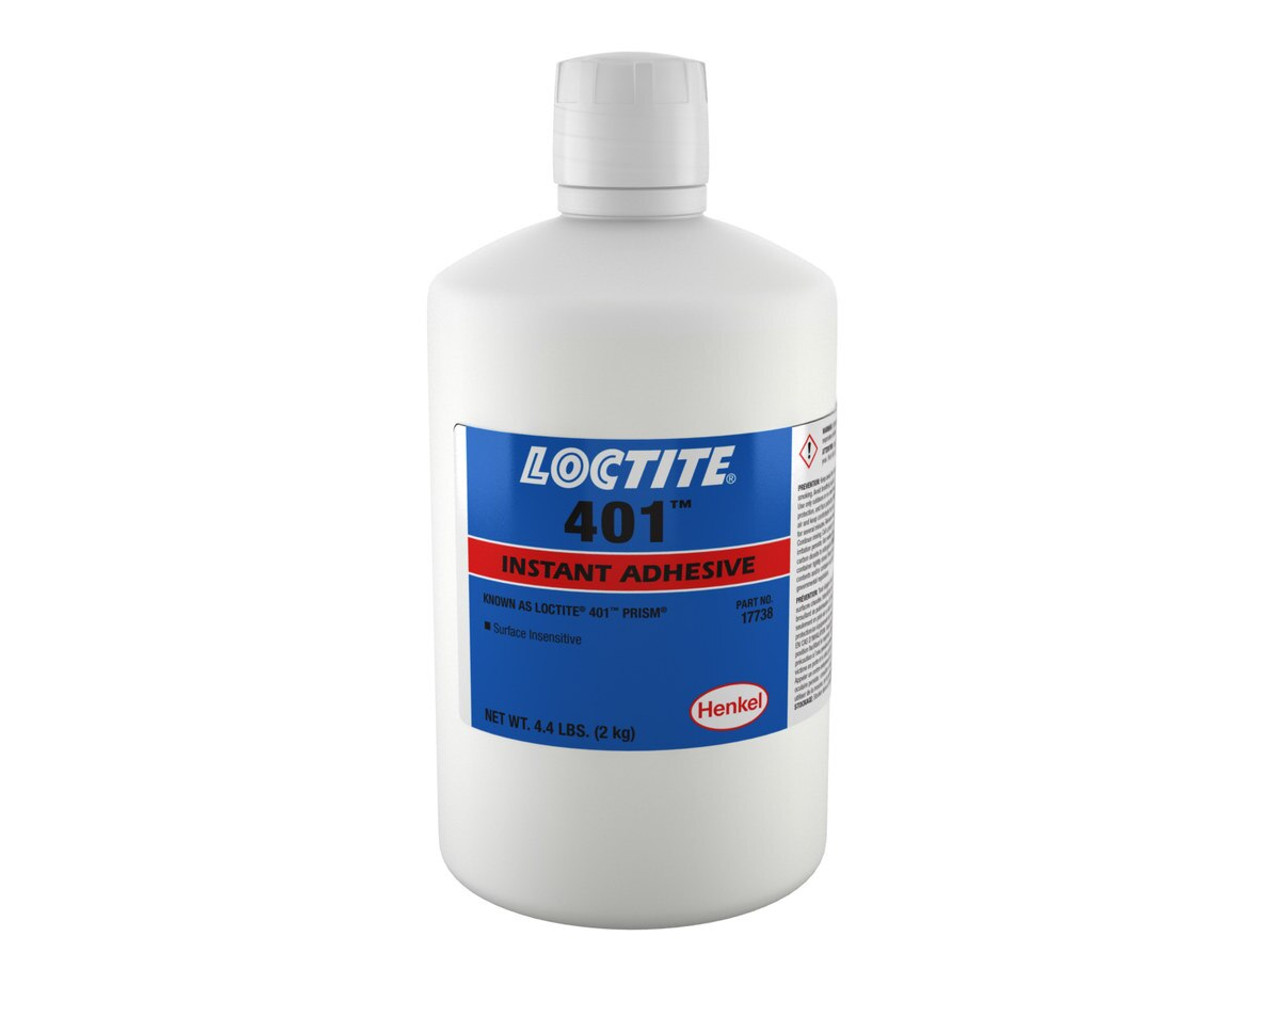 Henkel 17738 LOCTITE 401 Prism Clear Surface Insensitive Instant Adhesive -  2 Kg Bottle at